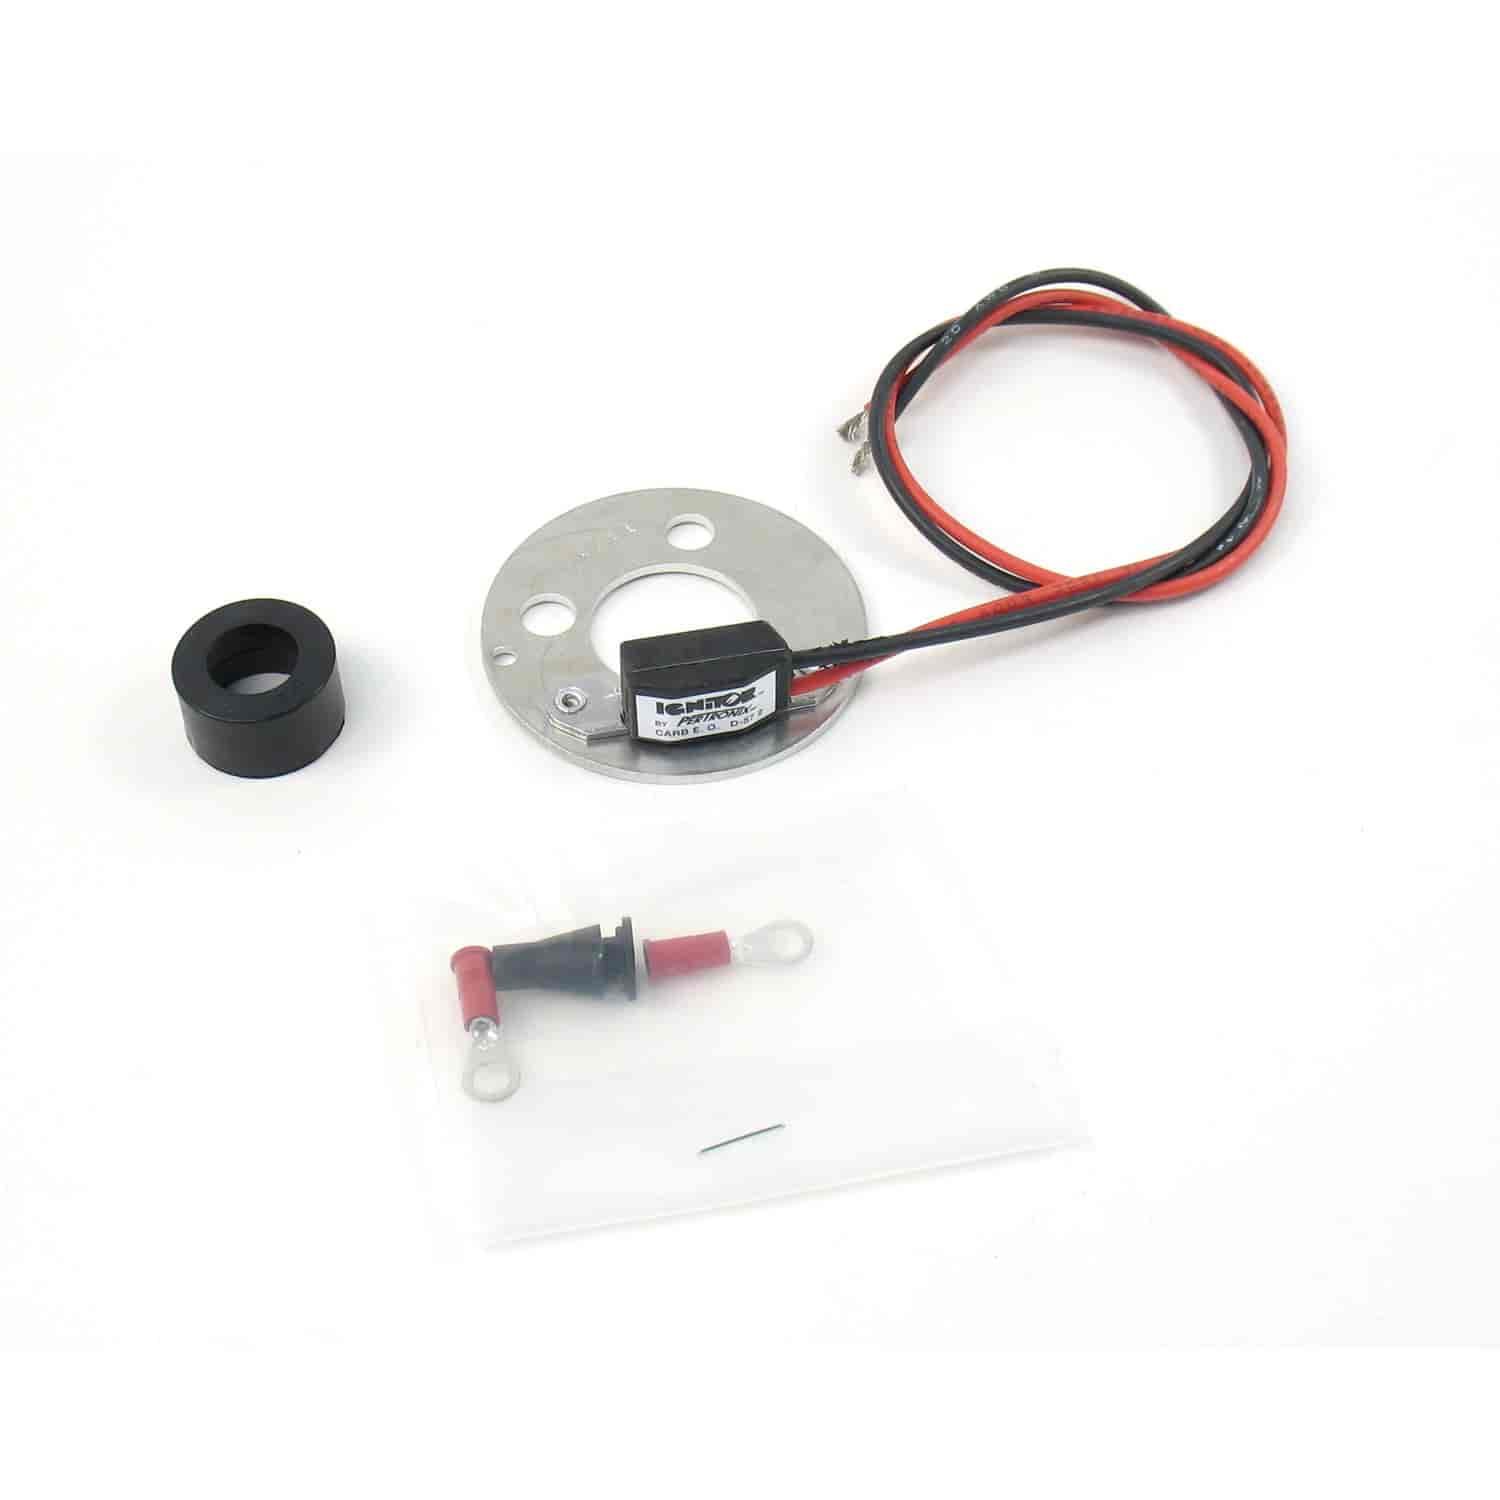 Ignitor Electronic Ignition Conversion Kit for Delco 2 cyl